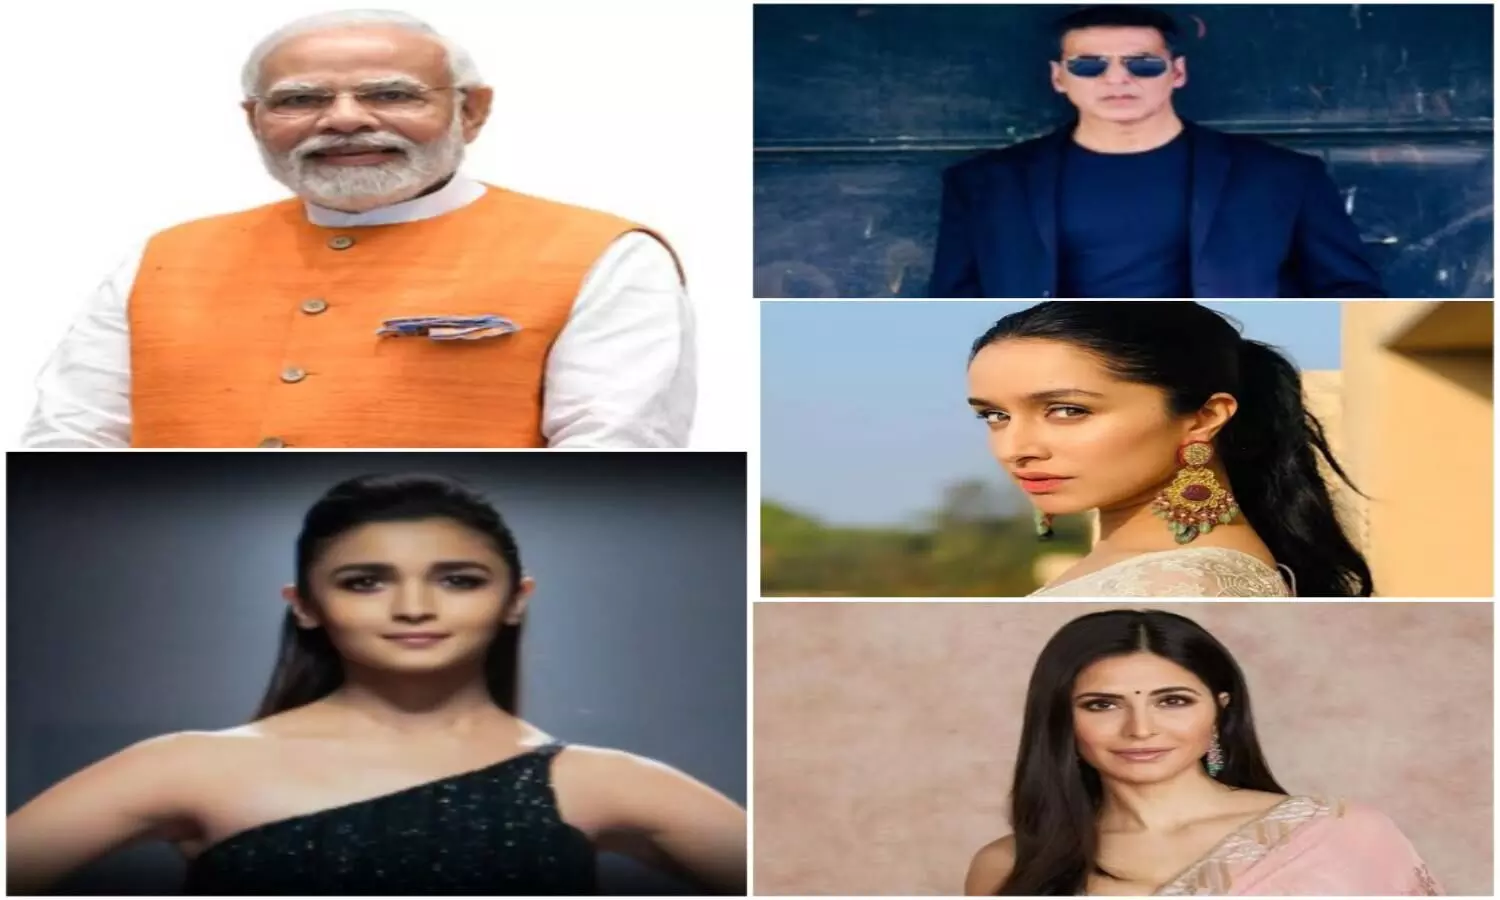 Top 10 Most Followed Instagram Accounts in India